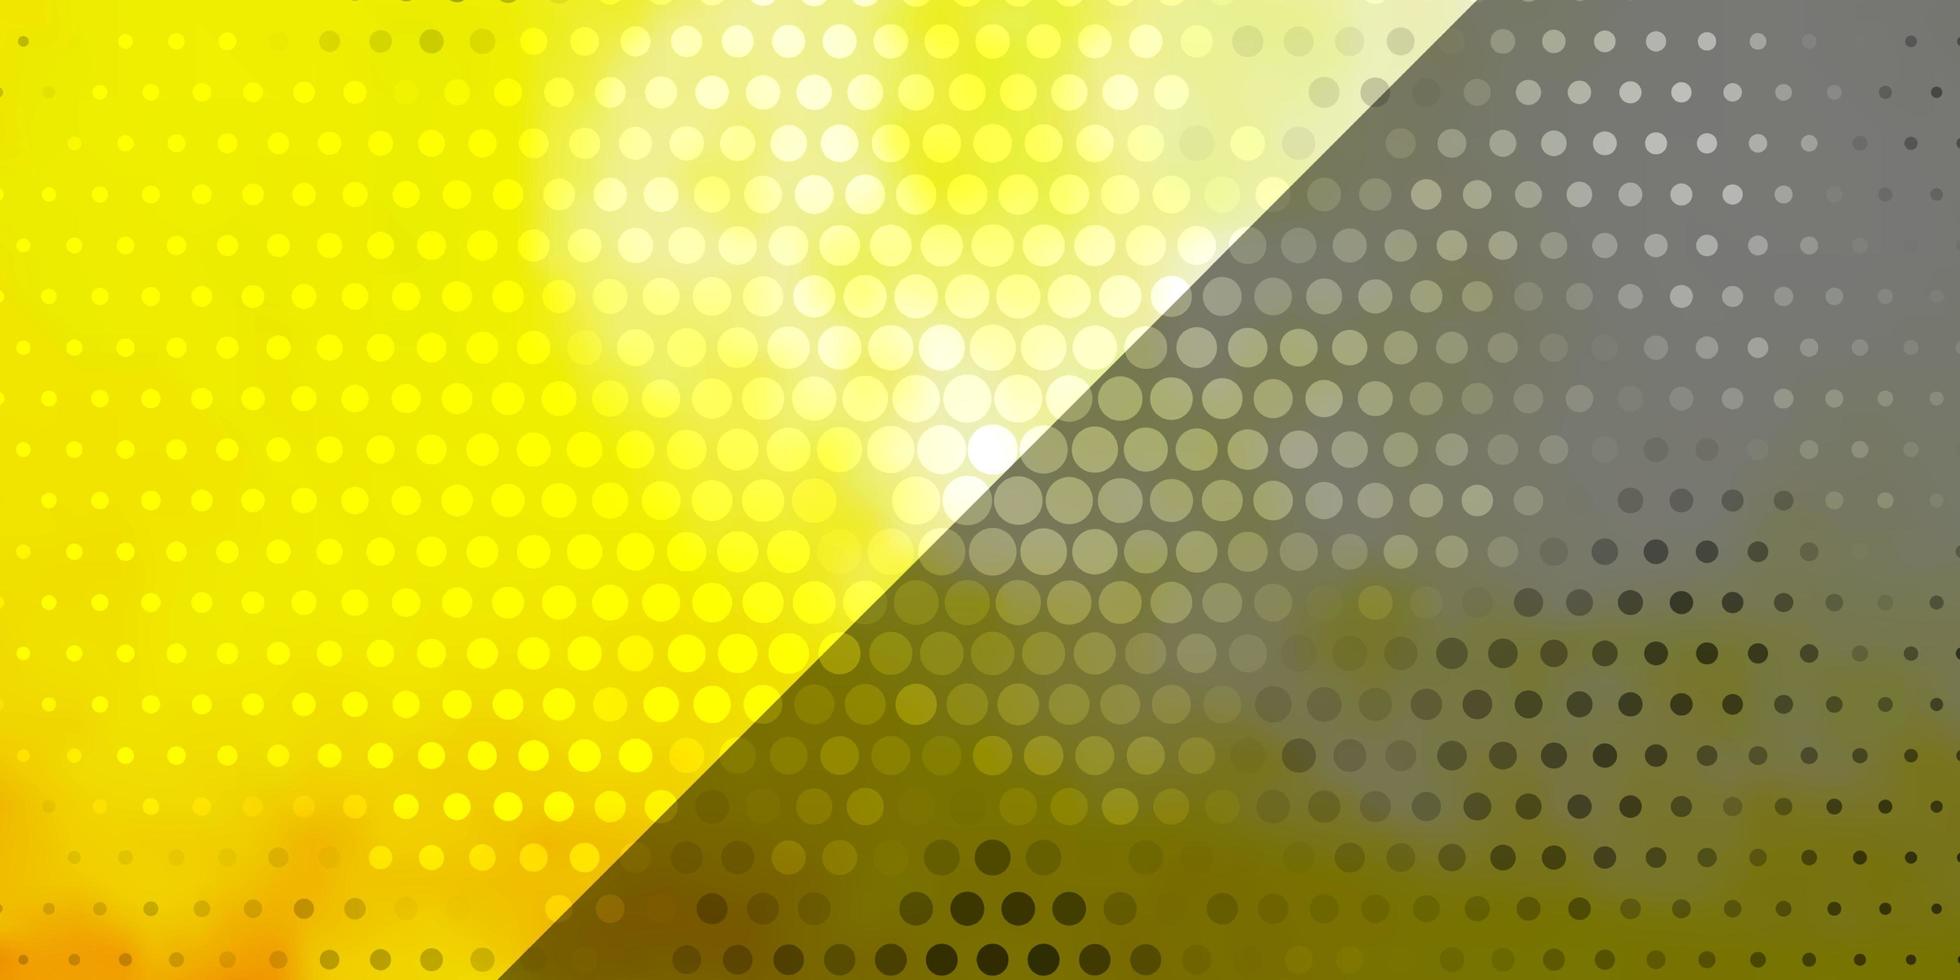 Light Red Yellow vector pattern with circles Abstract decorative design in gradient style with bubbles Pattern for websites landing pages